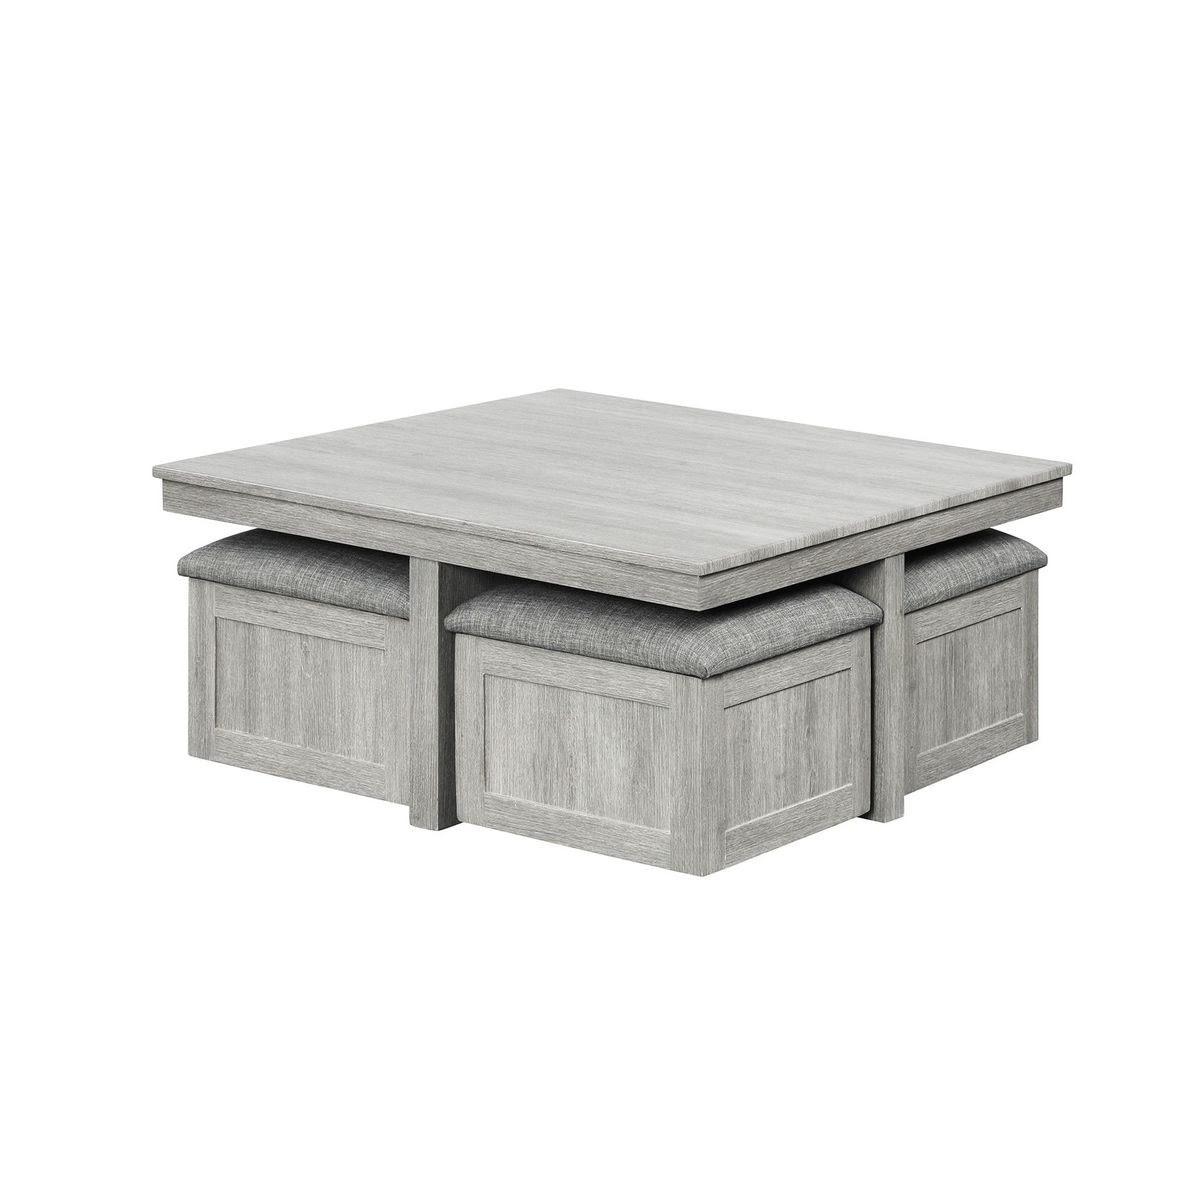 Ctut100 Cocktail Table with 4 Storage Benches,Harlem In-Store